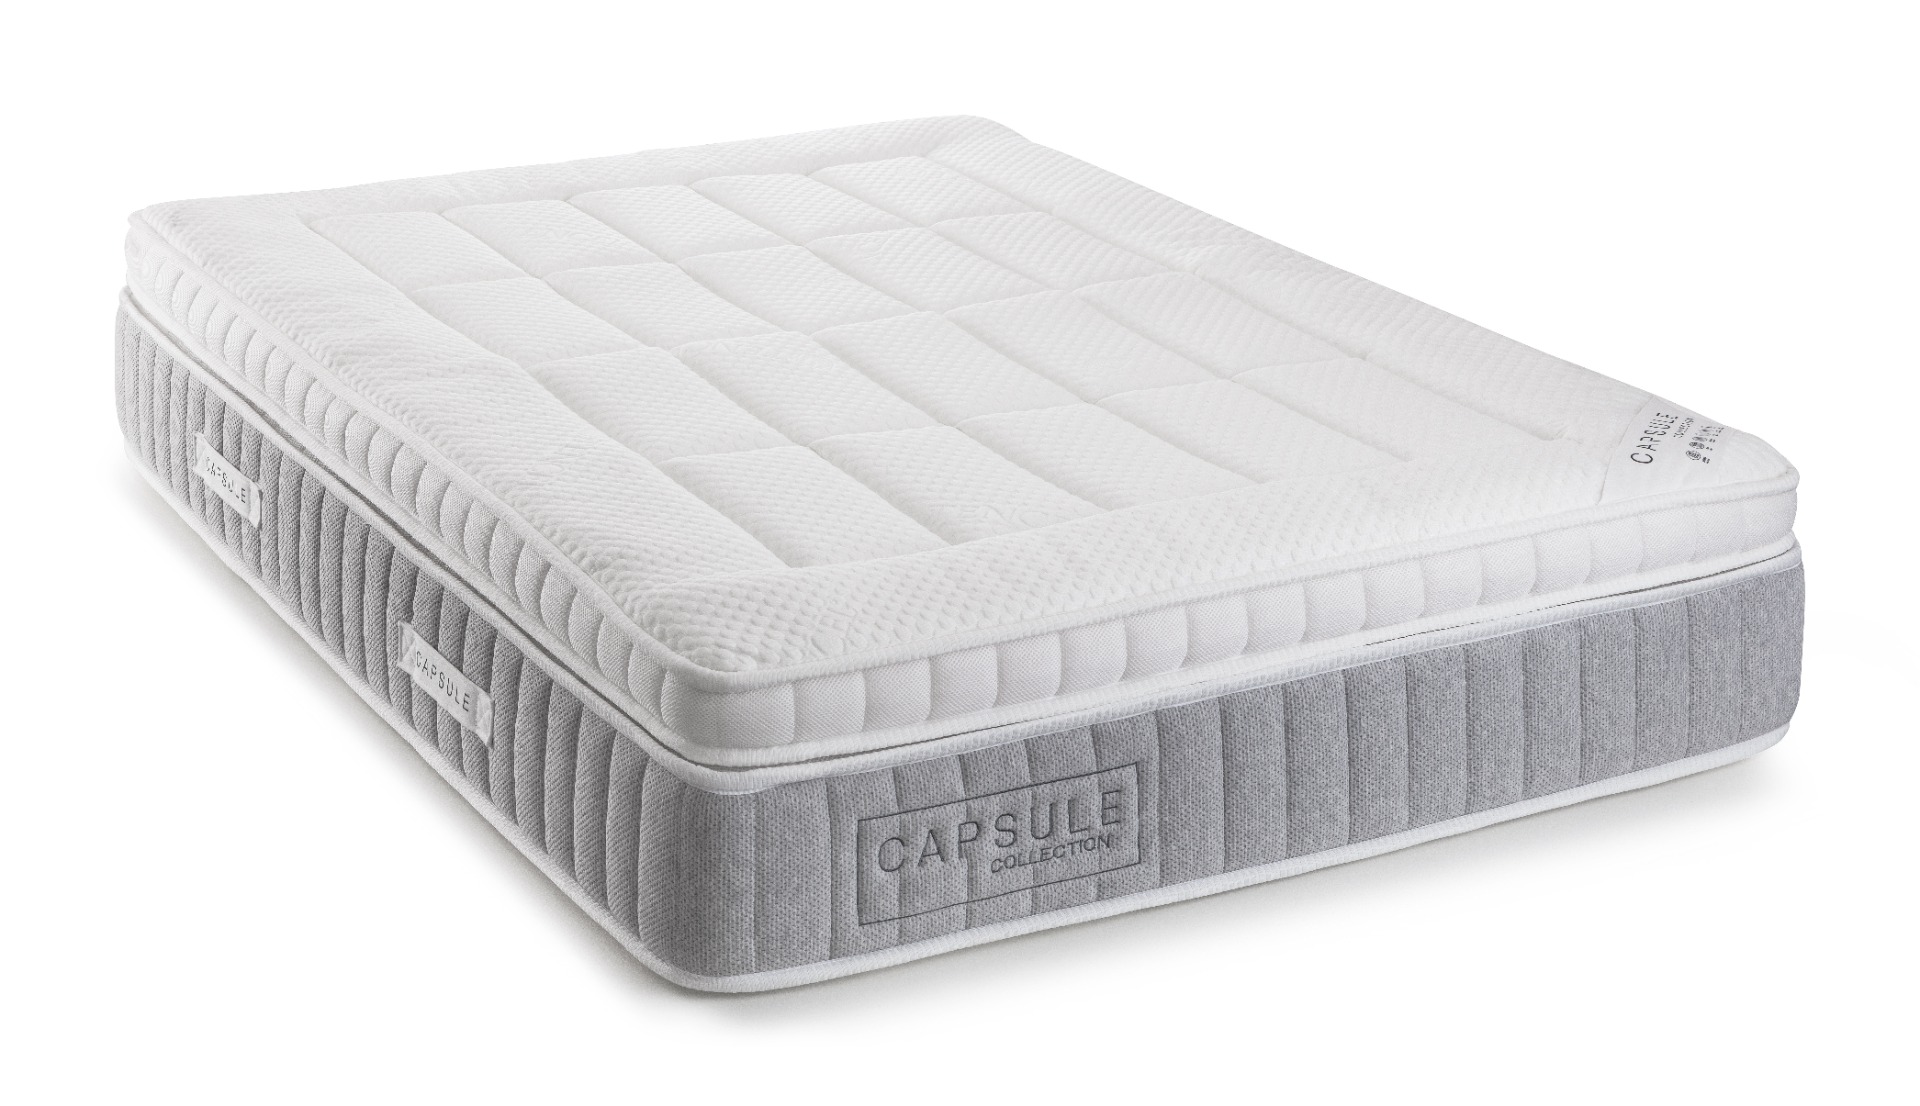 Capsule Boxtop 2000 Pocket Sprung and Memory Foam Mattress - 5ft King Size (150 X 200 cm)